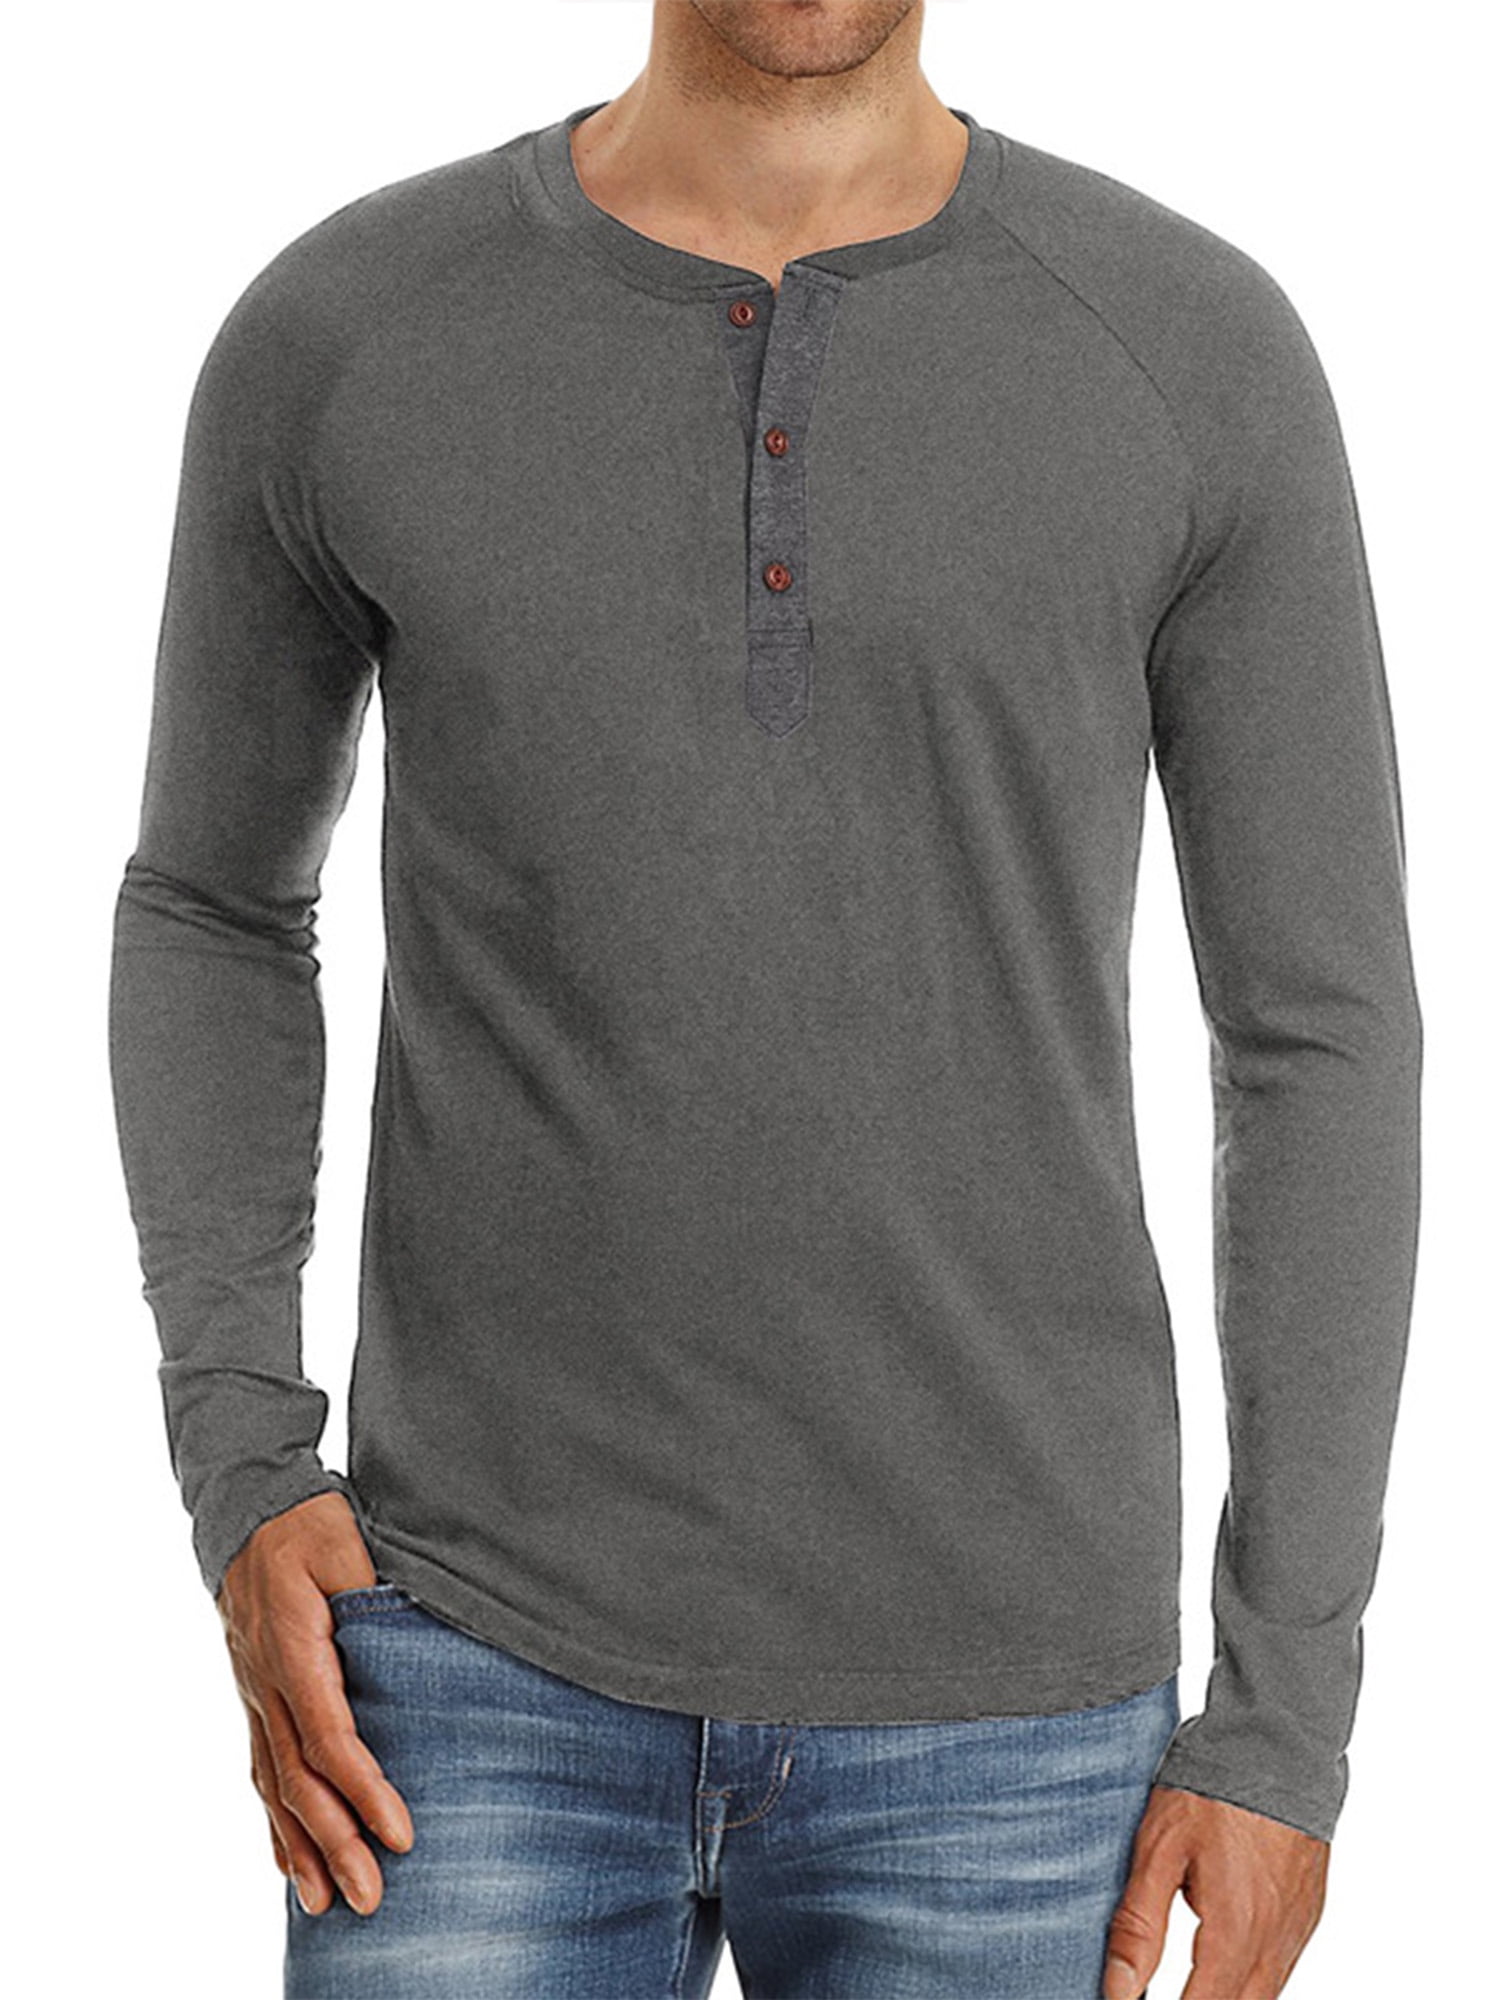 Lumento Mens Long Sleeve Plain Color Pullover Tops Casual Slim Fit Henley Shirts Male Work Fall - Walmart.com